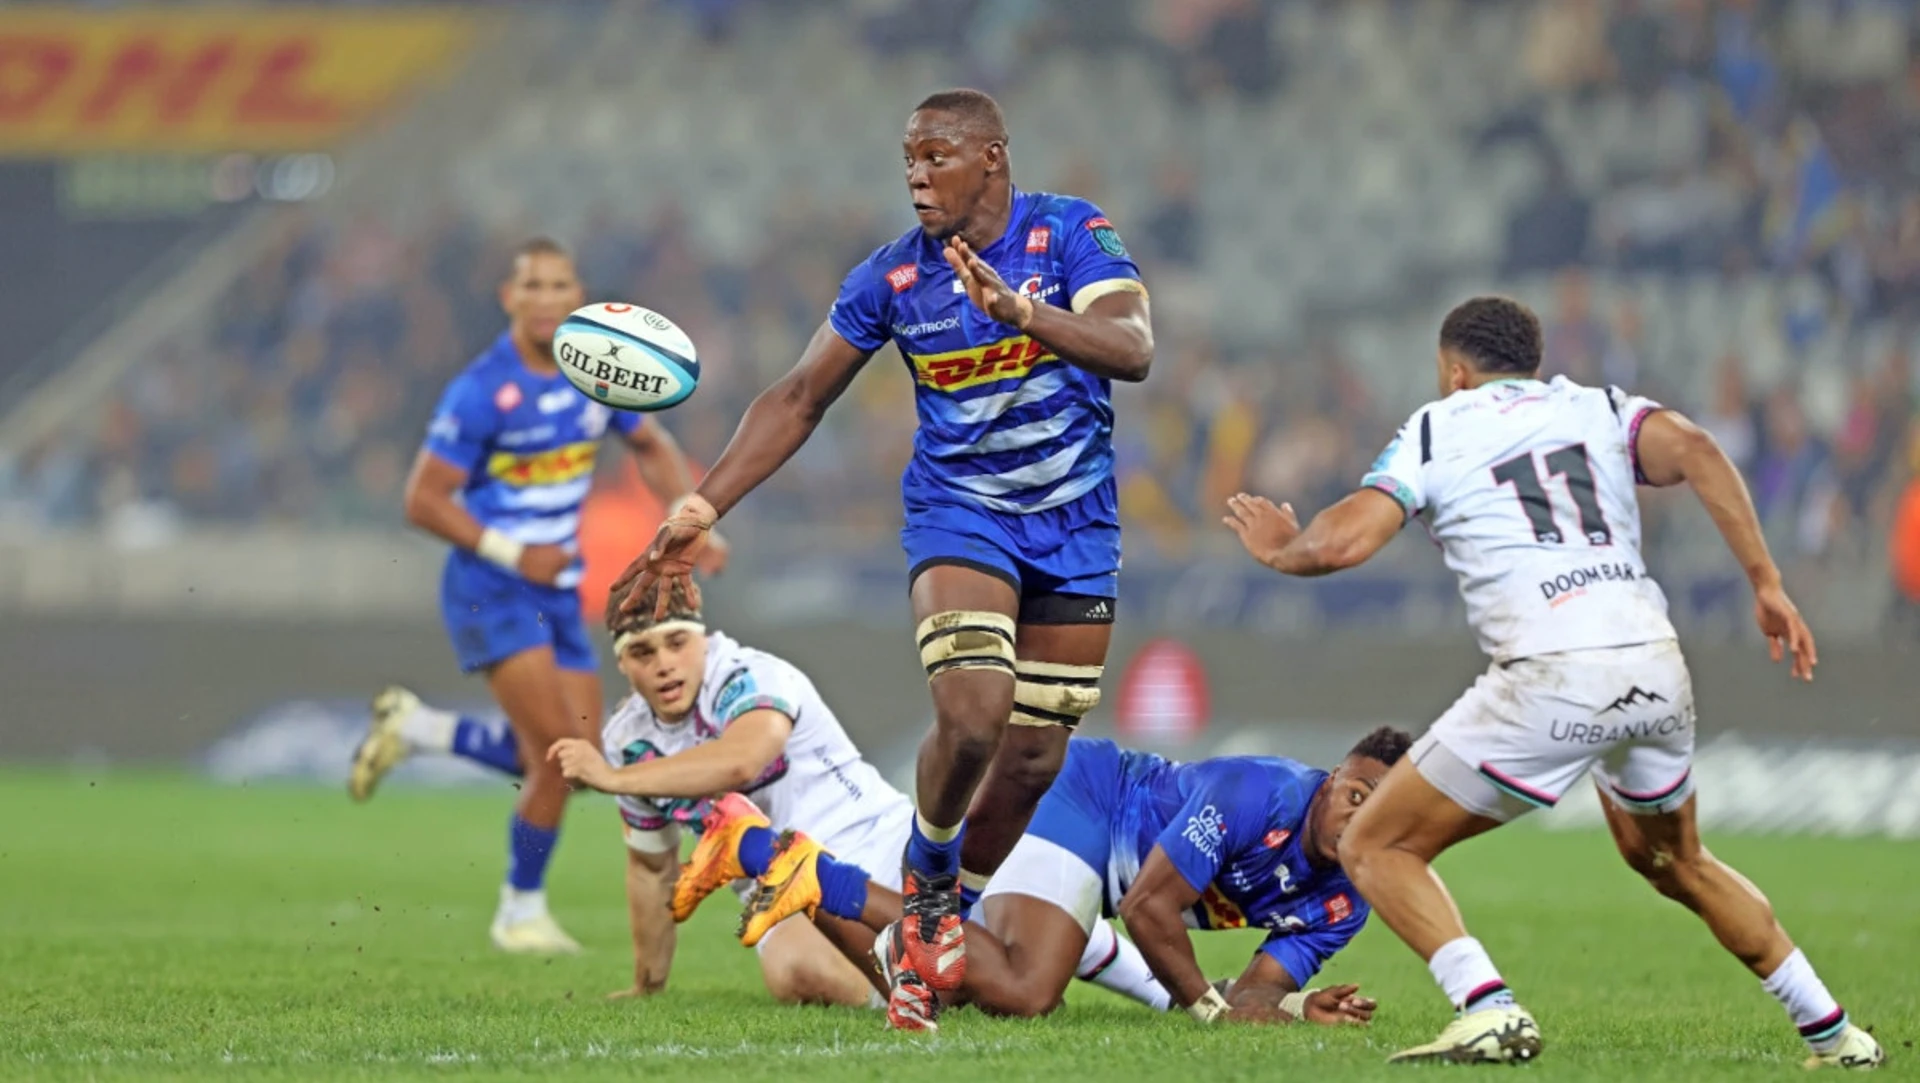 Xaba joins Bulls on two-year deal